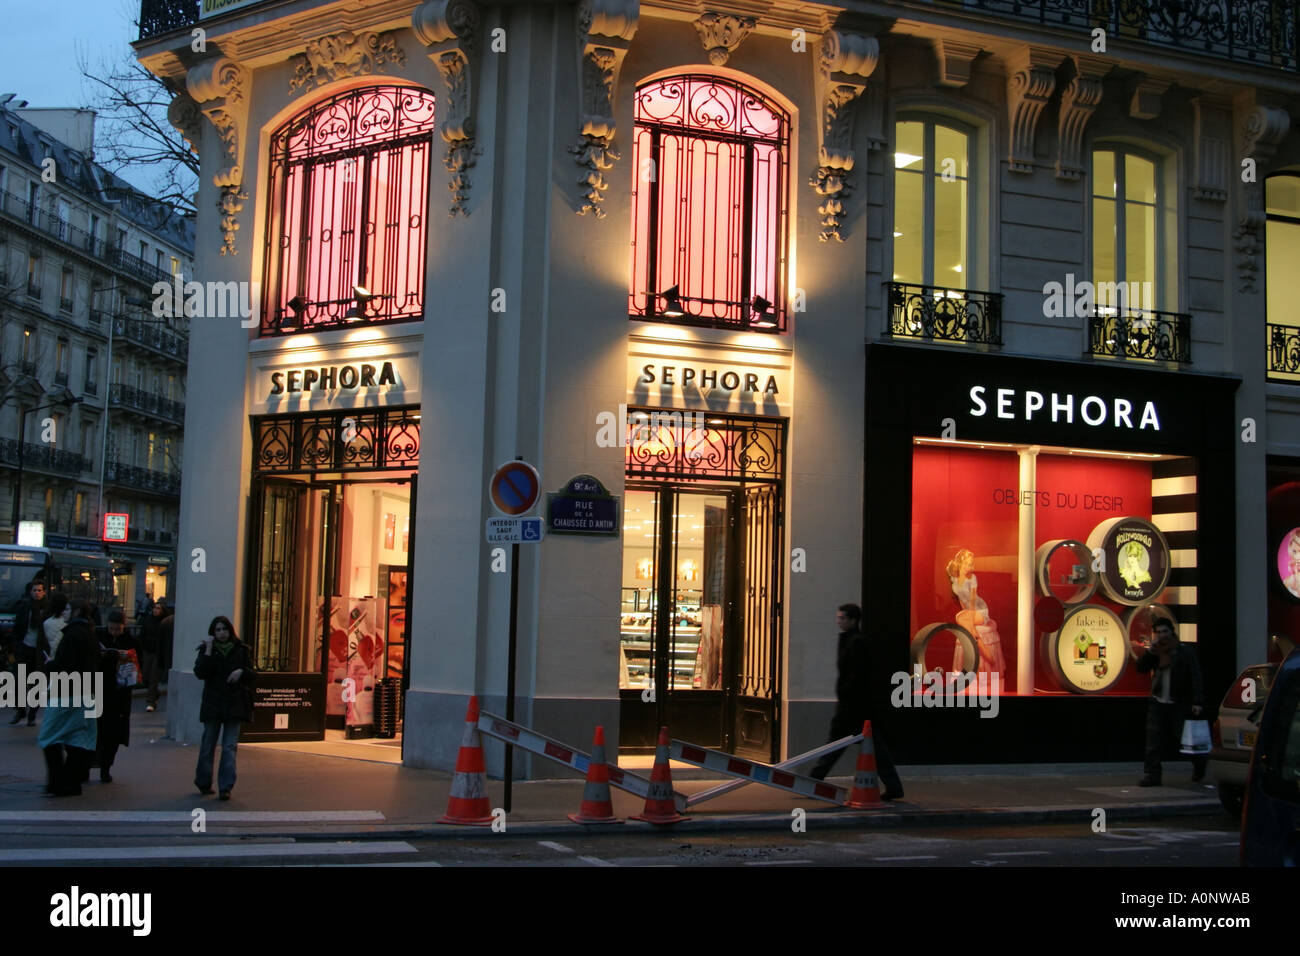 Sephora perfume and cosmetics shop in France at dusk Stock Photo - Alamy